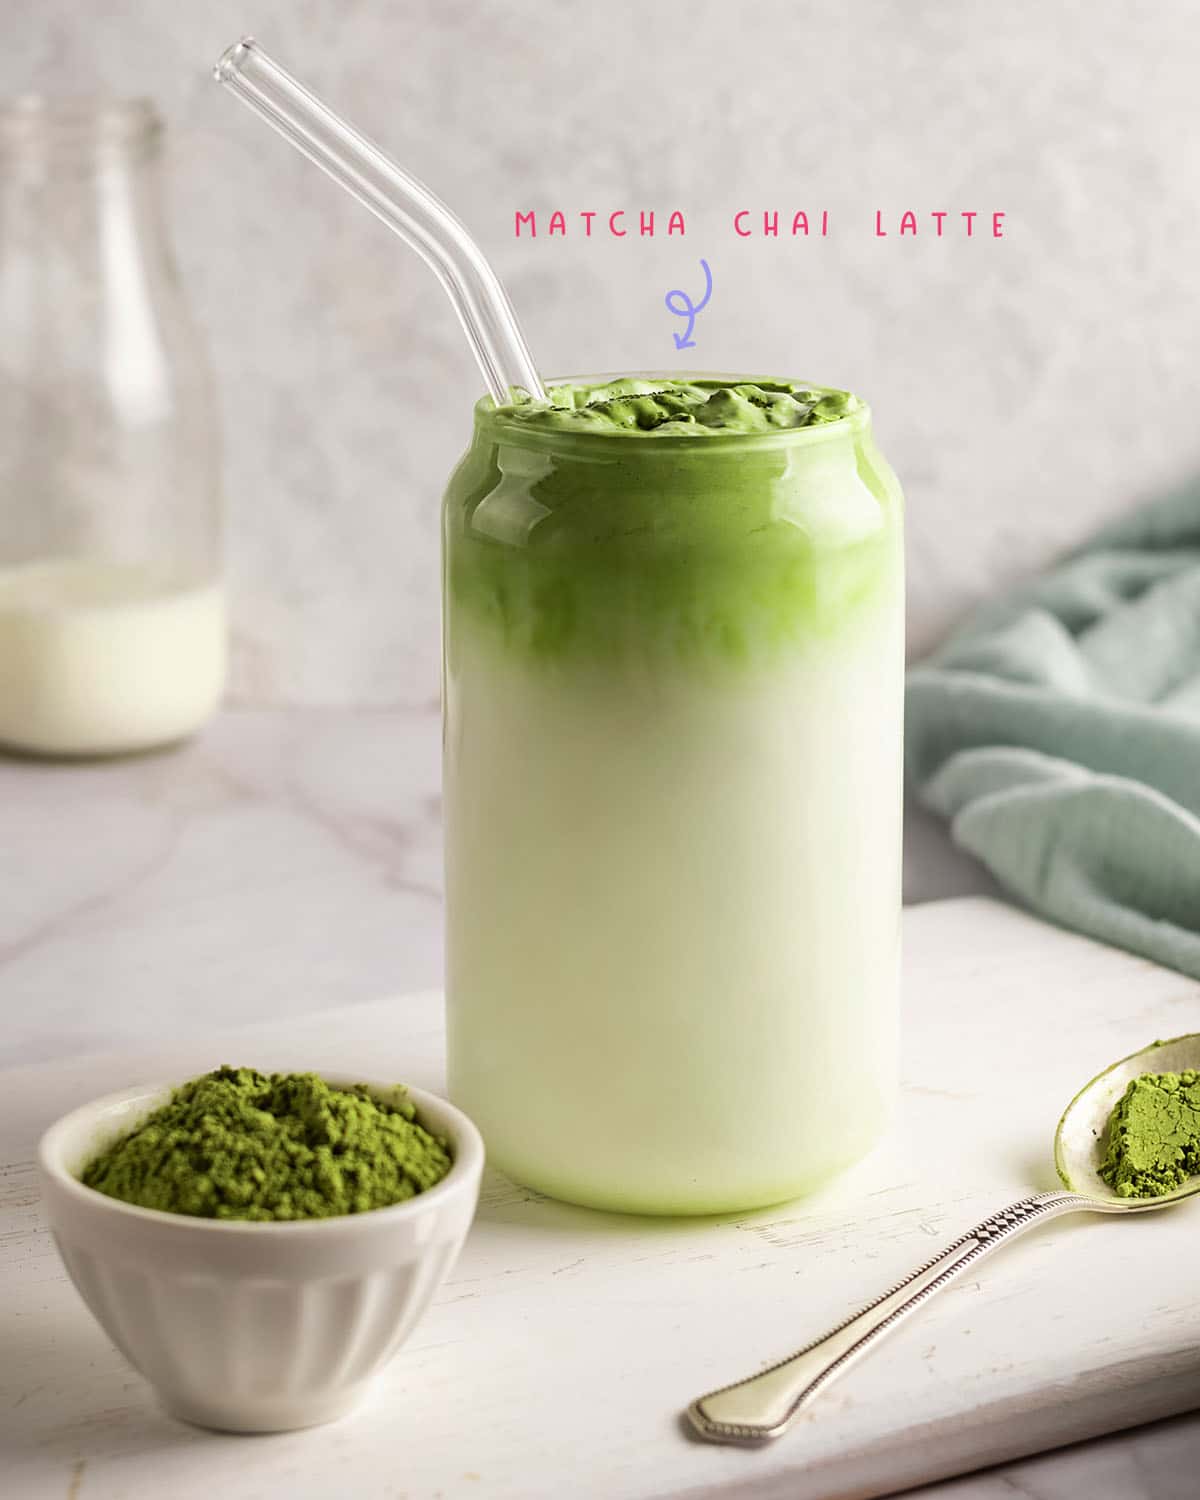 The matcha gives it a beautiful green color, and the chai spices add a depth of flavor that is simply irresistible. And to top it all off, you can add a dollop of whipped cream and a sprinkle of matcha powder for extra decadence.